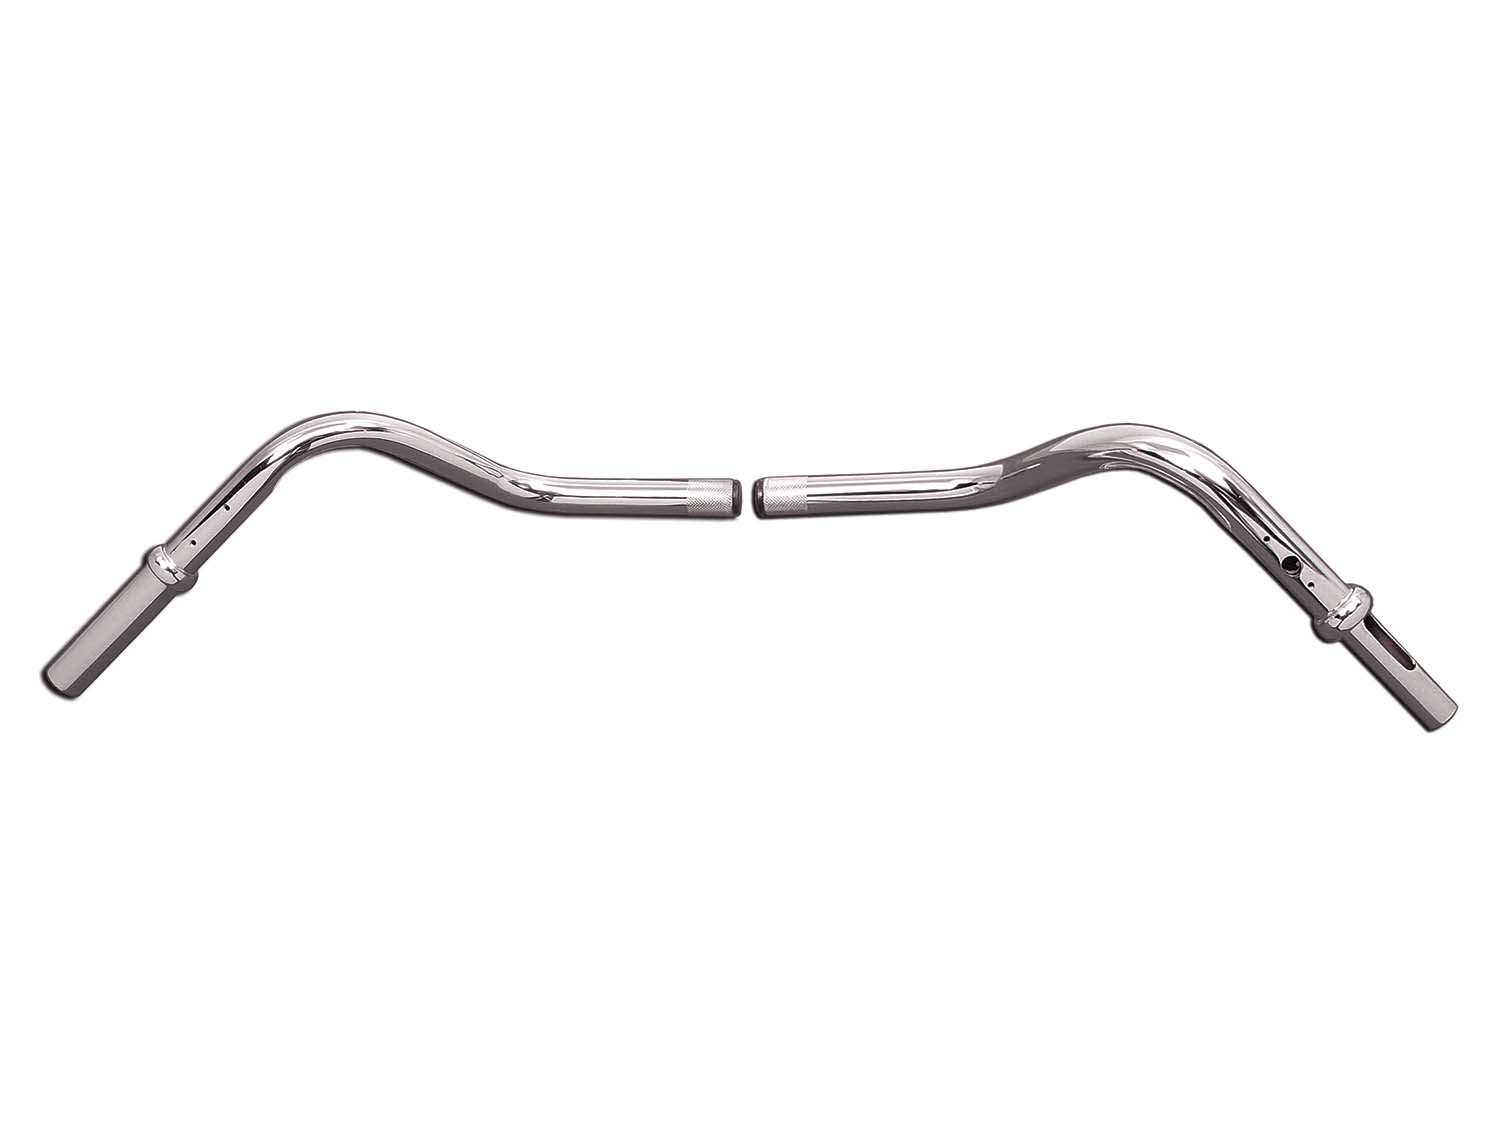 4-1/2" Glide Handlebar without Indents